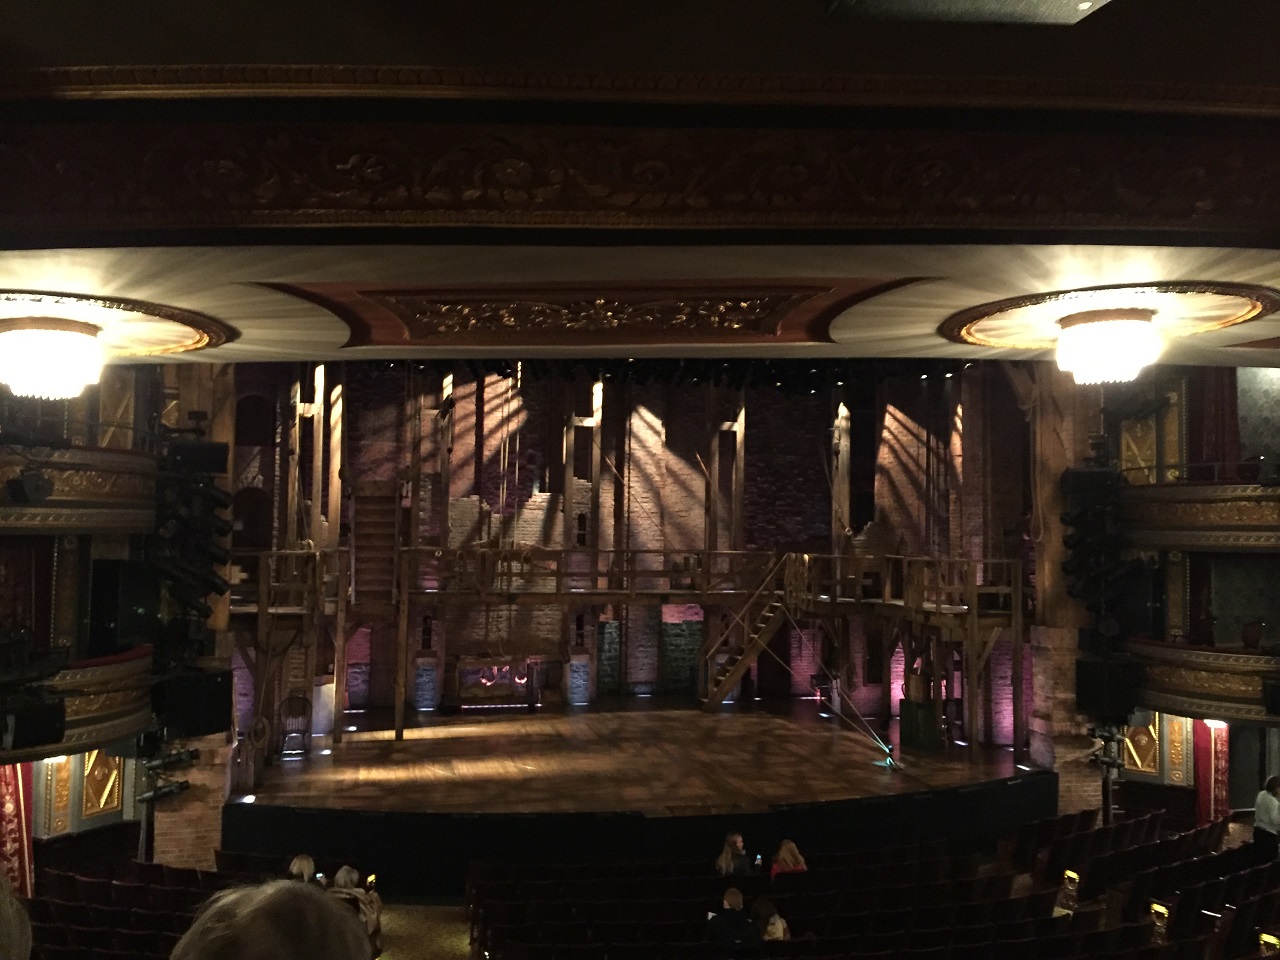 One ticket to Hamilton orchestra view of stage